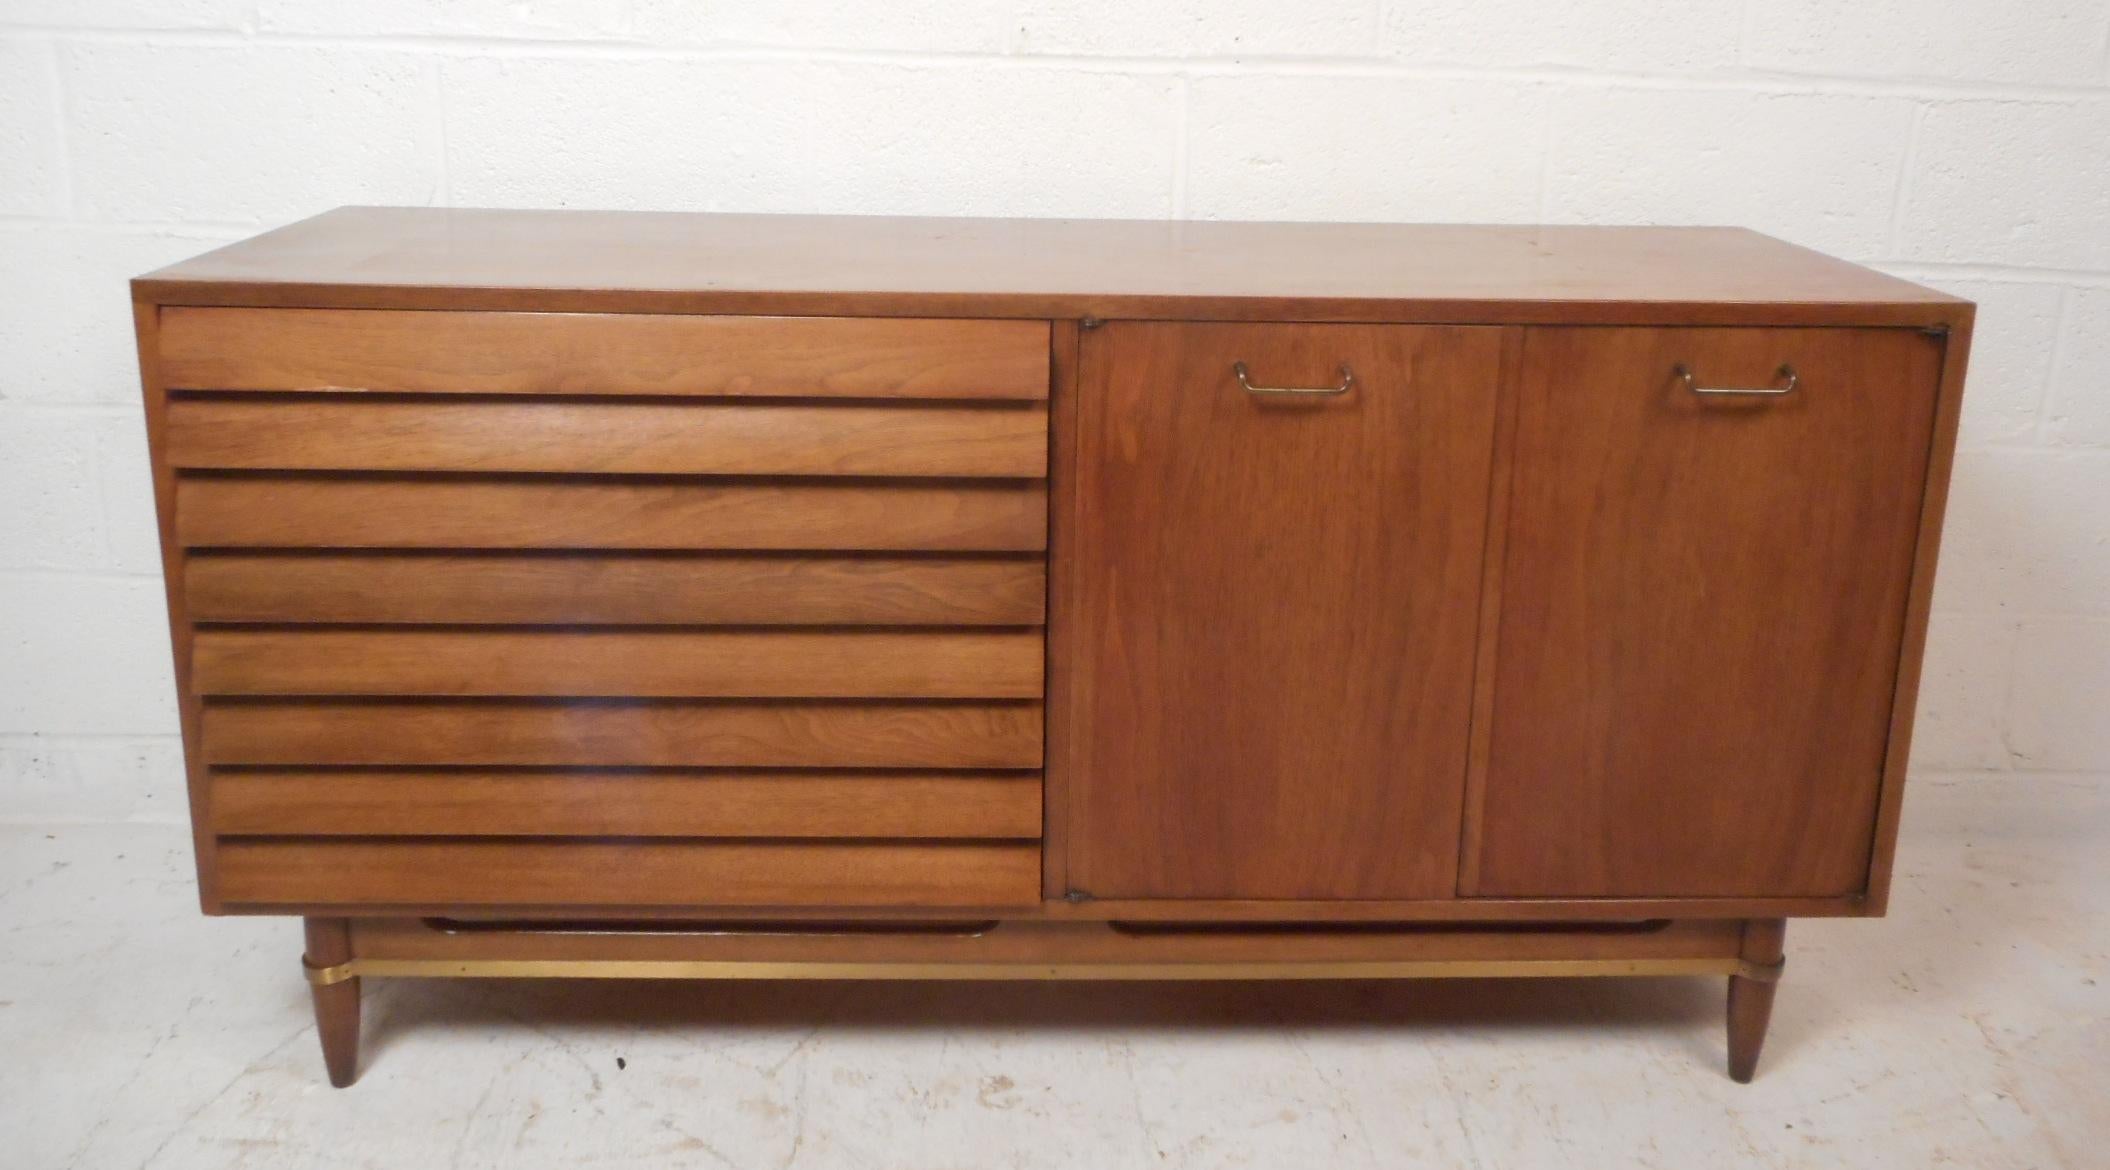 This stunning vintage modern credenza features three large drawers with louvered fronts and three small drawers hidden by two cabinet doors. A fabulous case piece with a large hidden compartment, tapered legs, and a sculpted base with brass trim